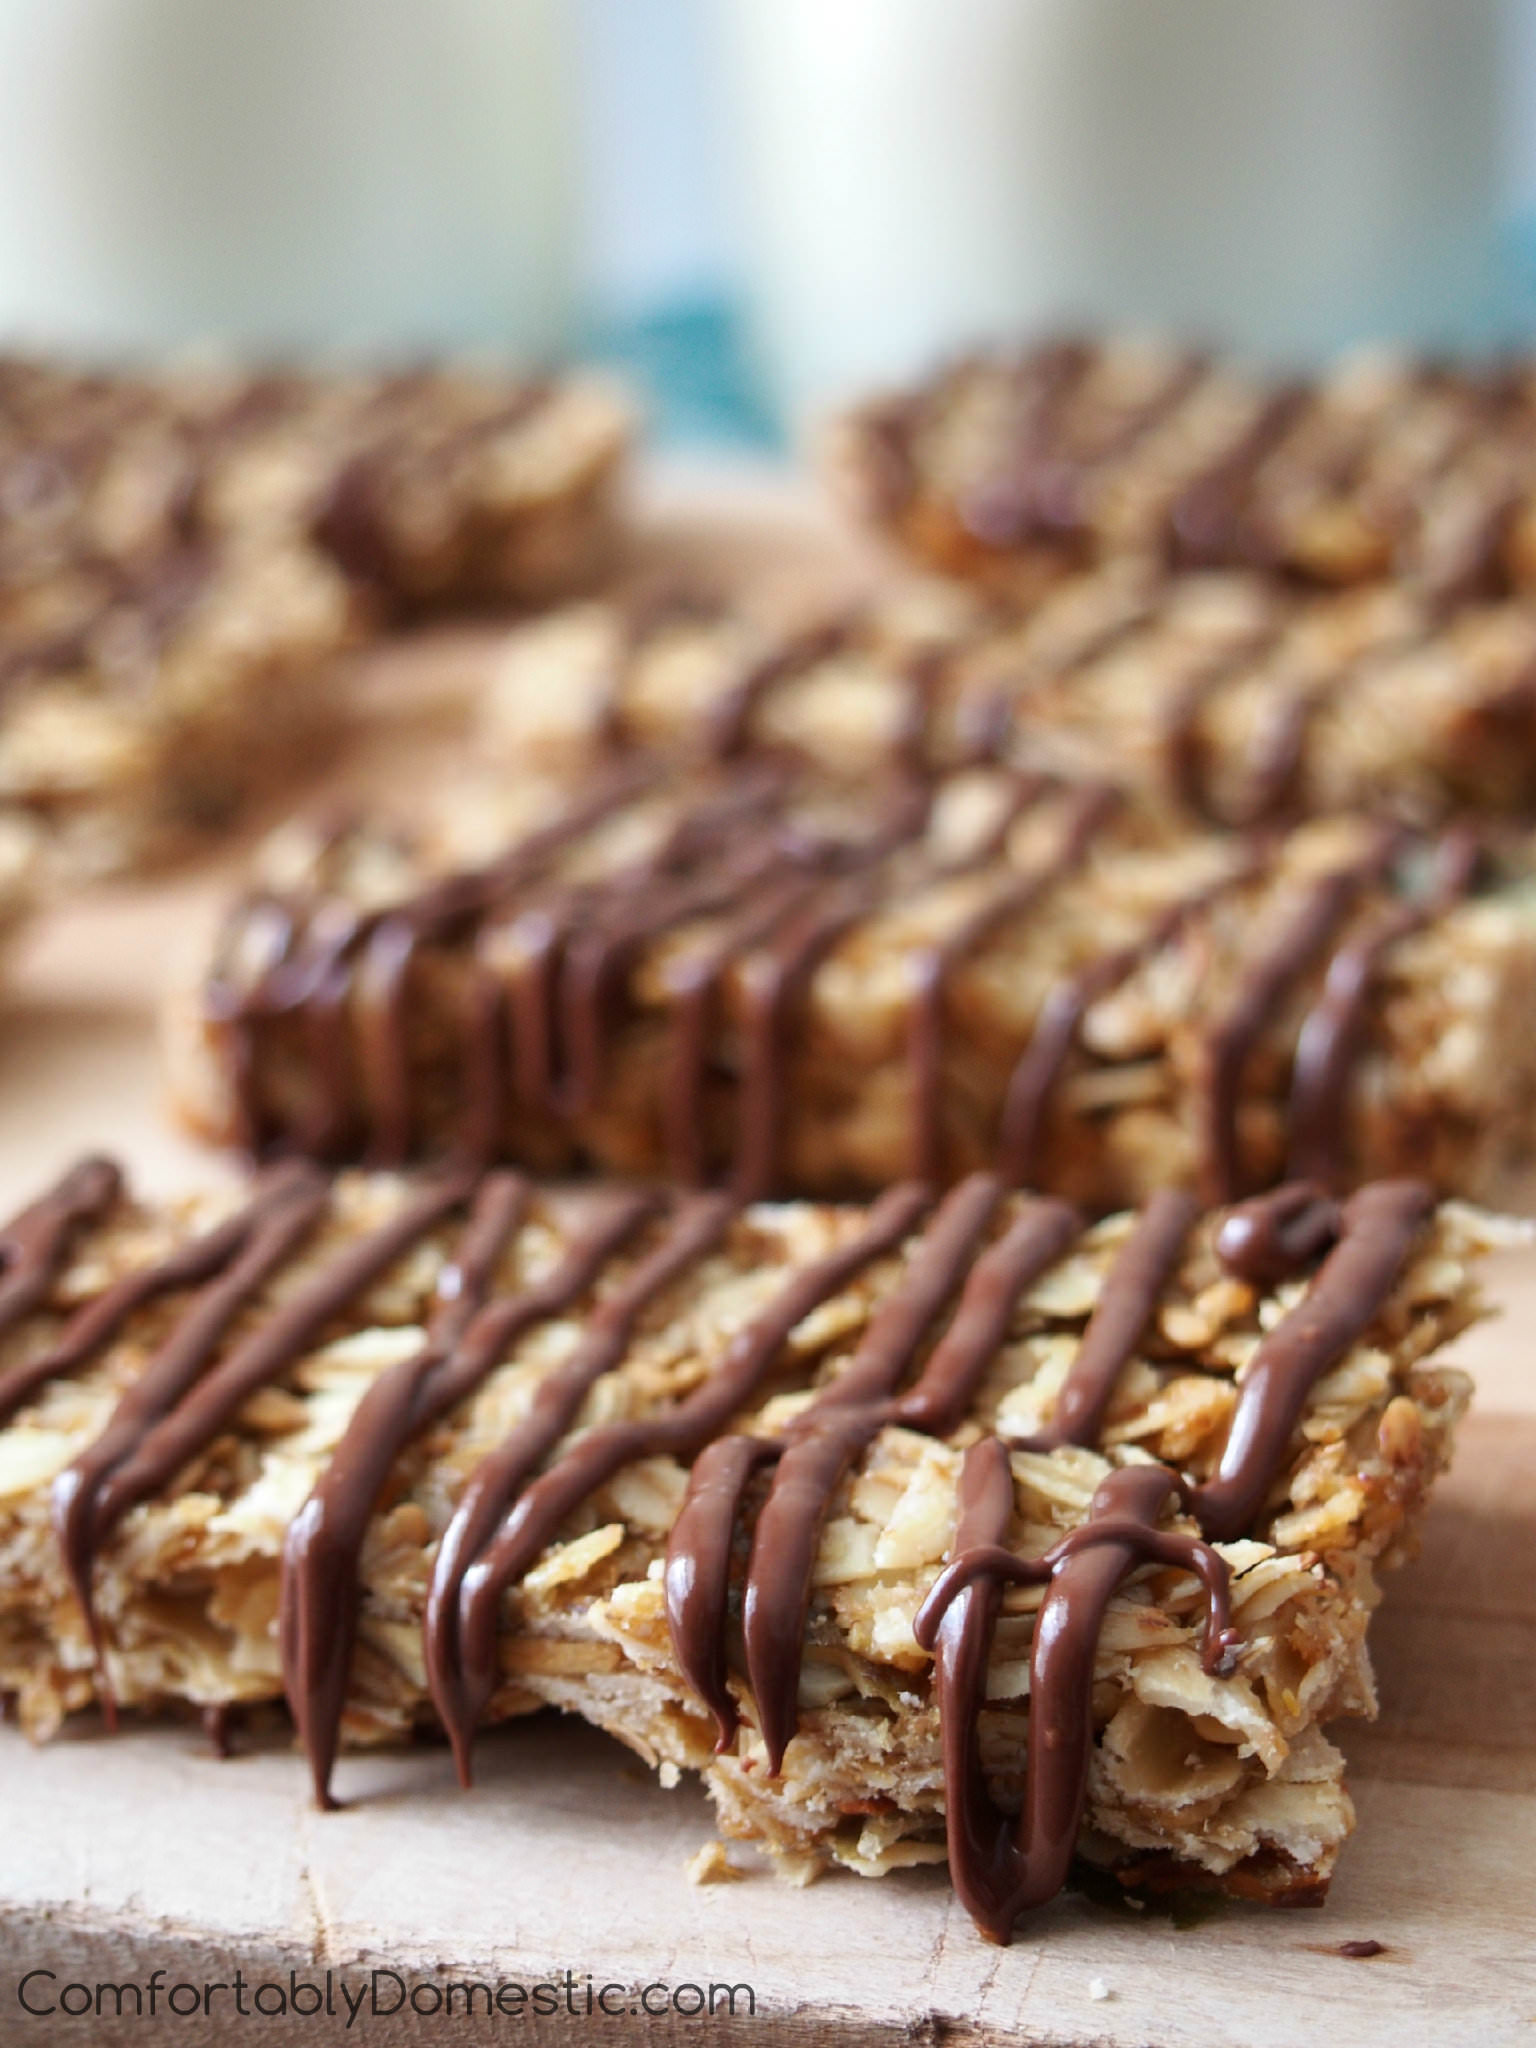 Crunchy Granola Bars are a distinctively crunchy, homemade granola bar with healthy oats, nuts, and chocolate. This recipe is a wholesome snack on the go. | ComfortablyDomestic.com